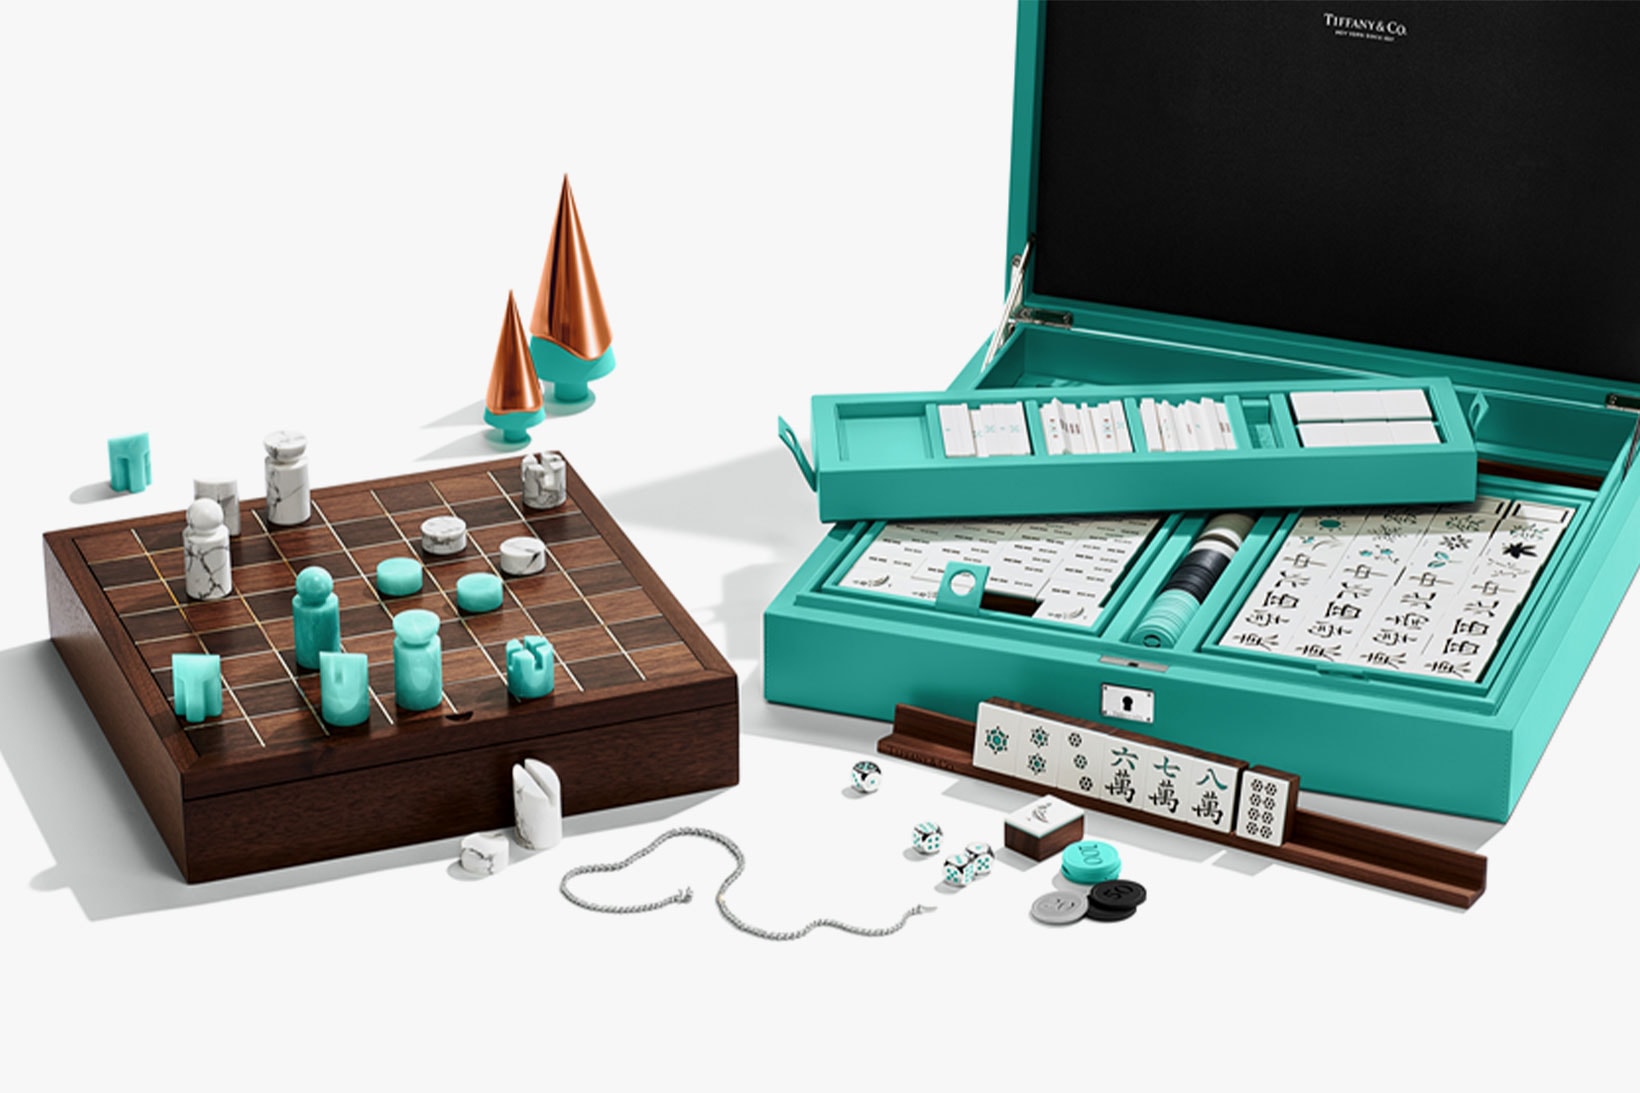 tiffany and co mahjong chess checkers set price board games holiday christmas home accessories luxury decor 